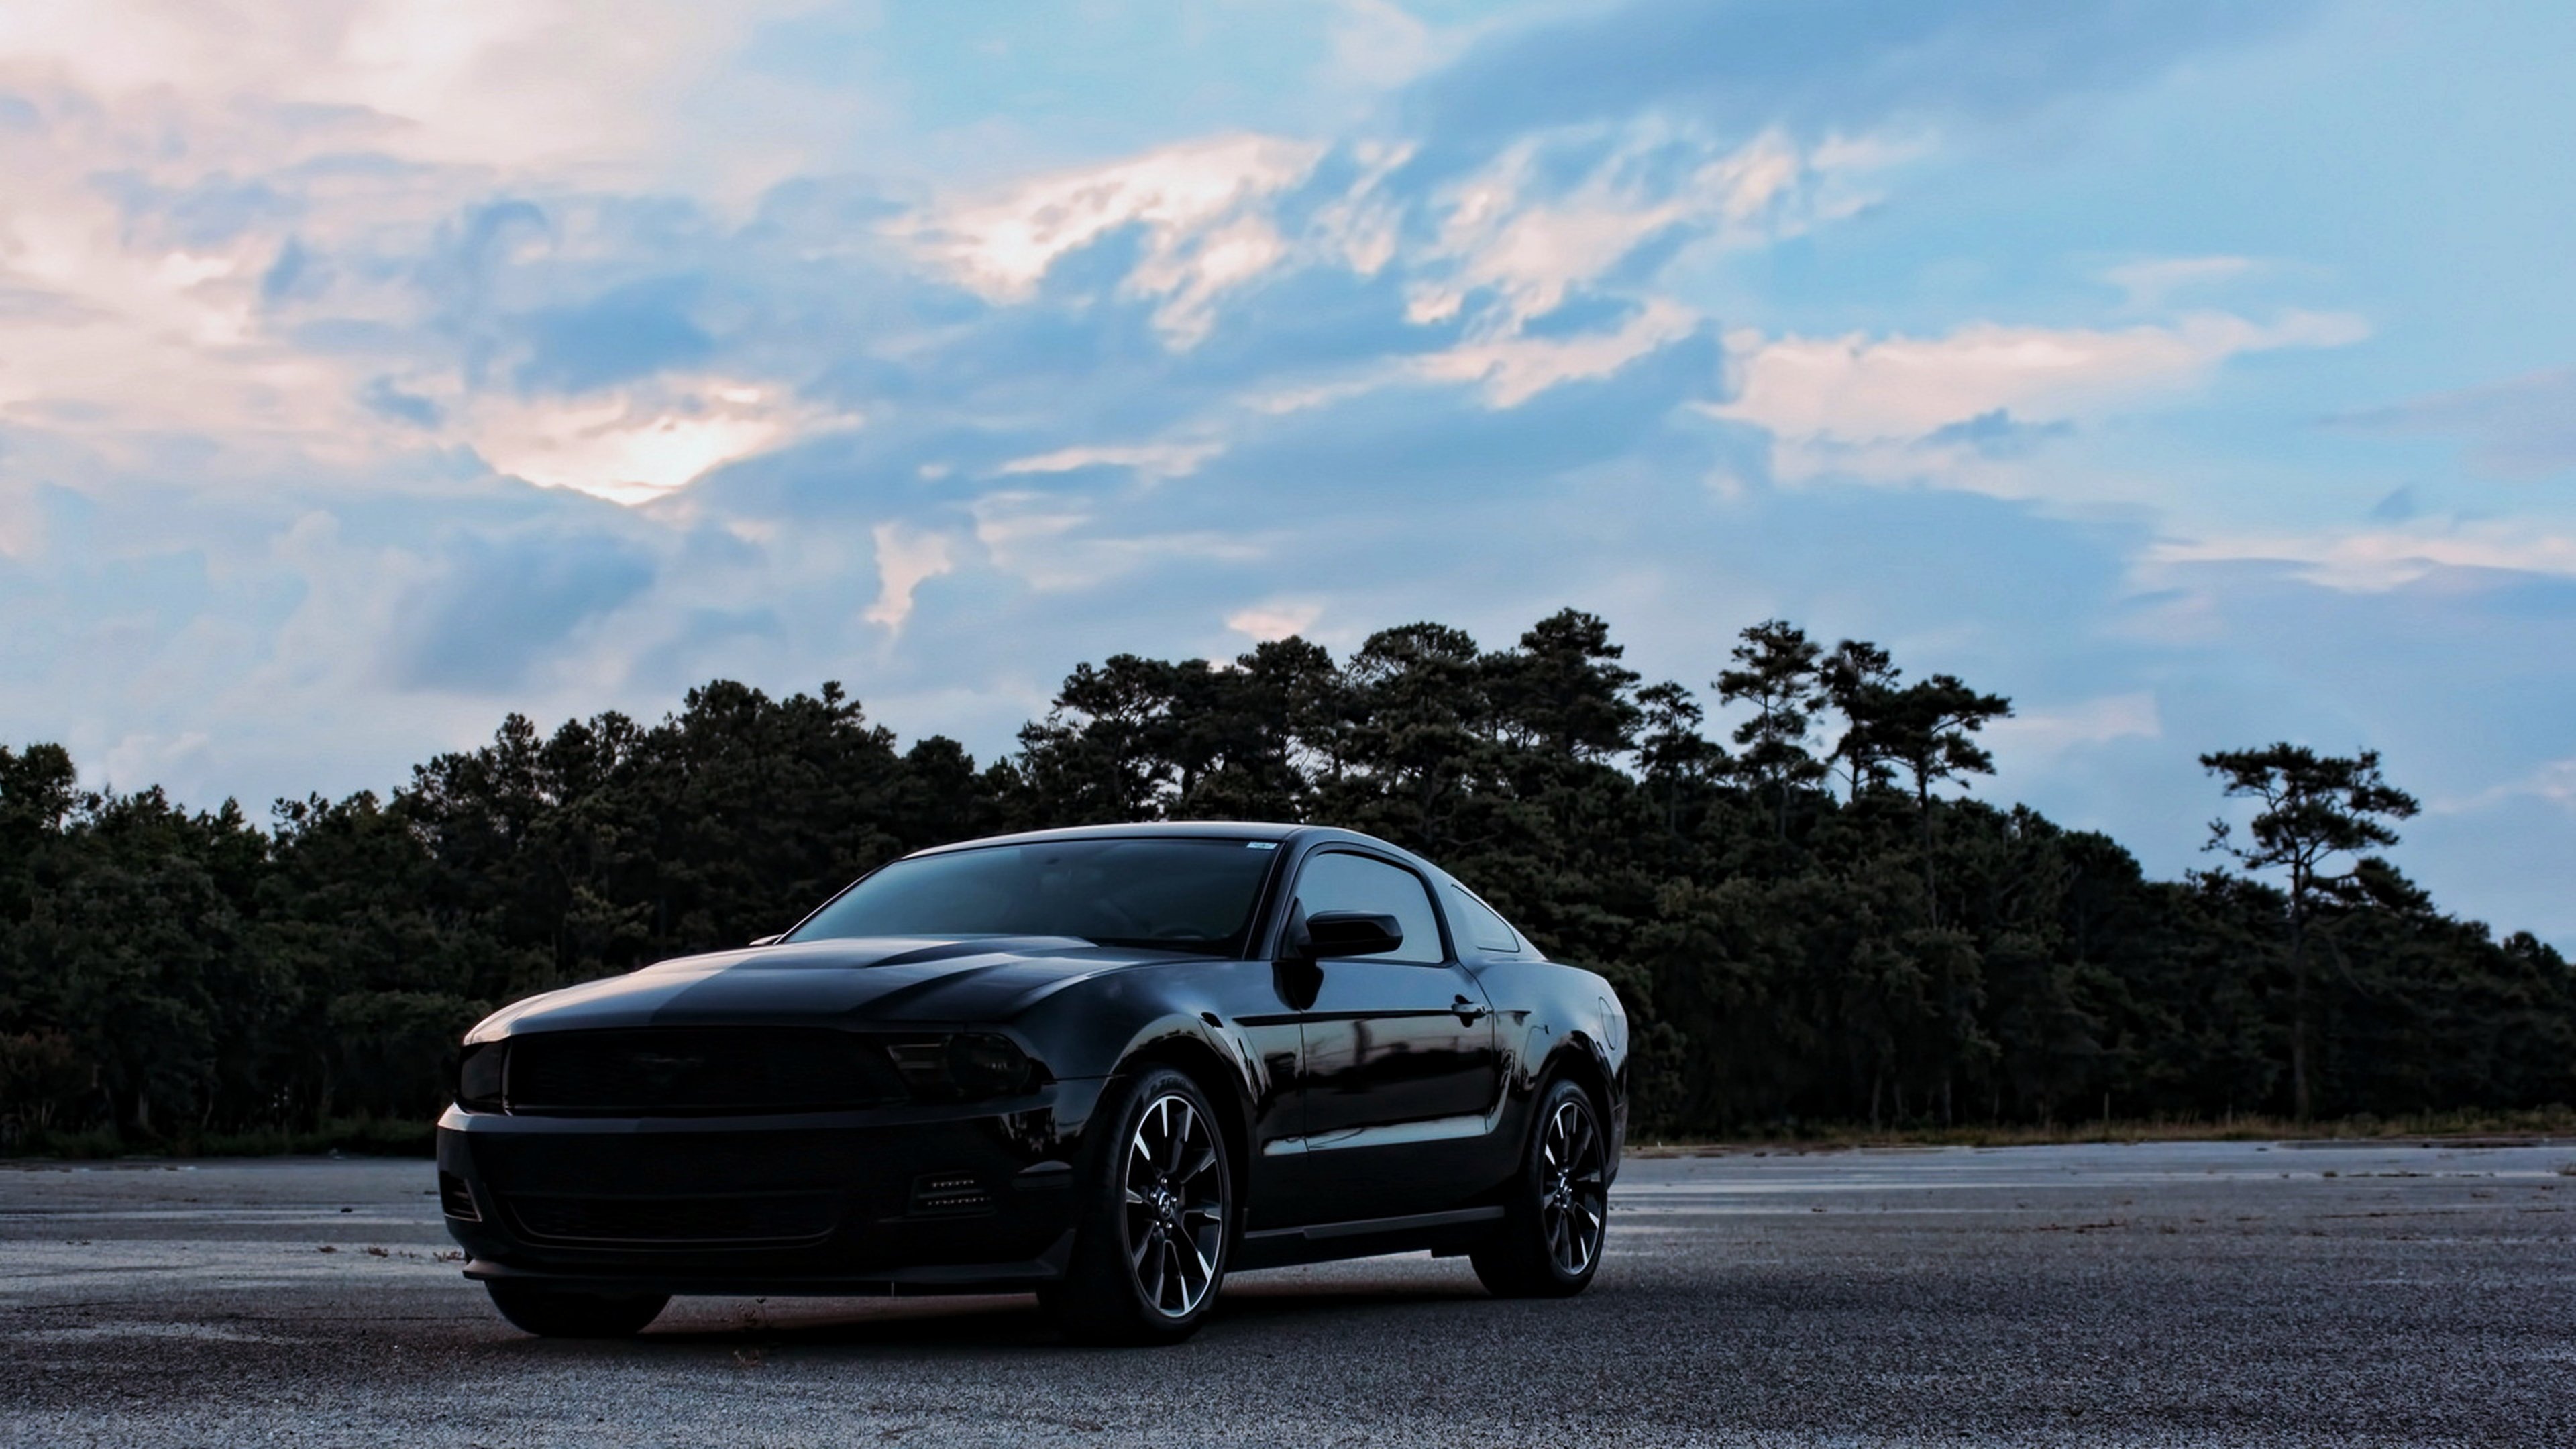 ford, Mustang, Black, Road, Force, Speed, Motors, Race, Forest, Cloud, Super, Cars Wallpaper